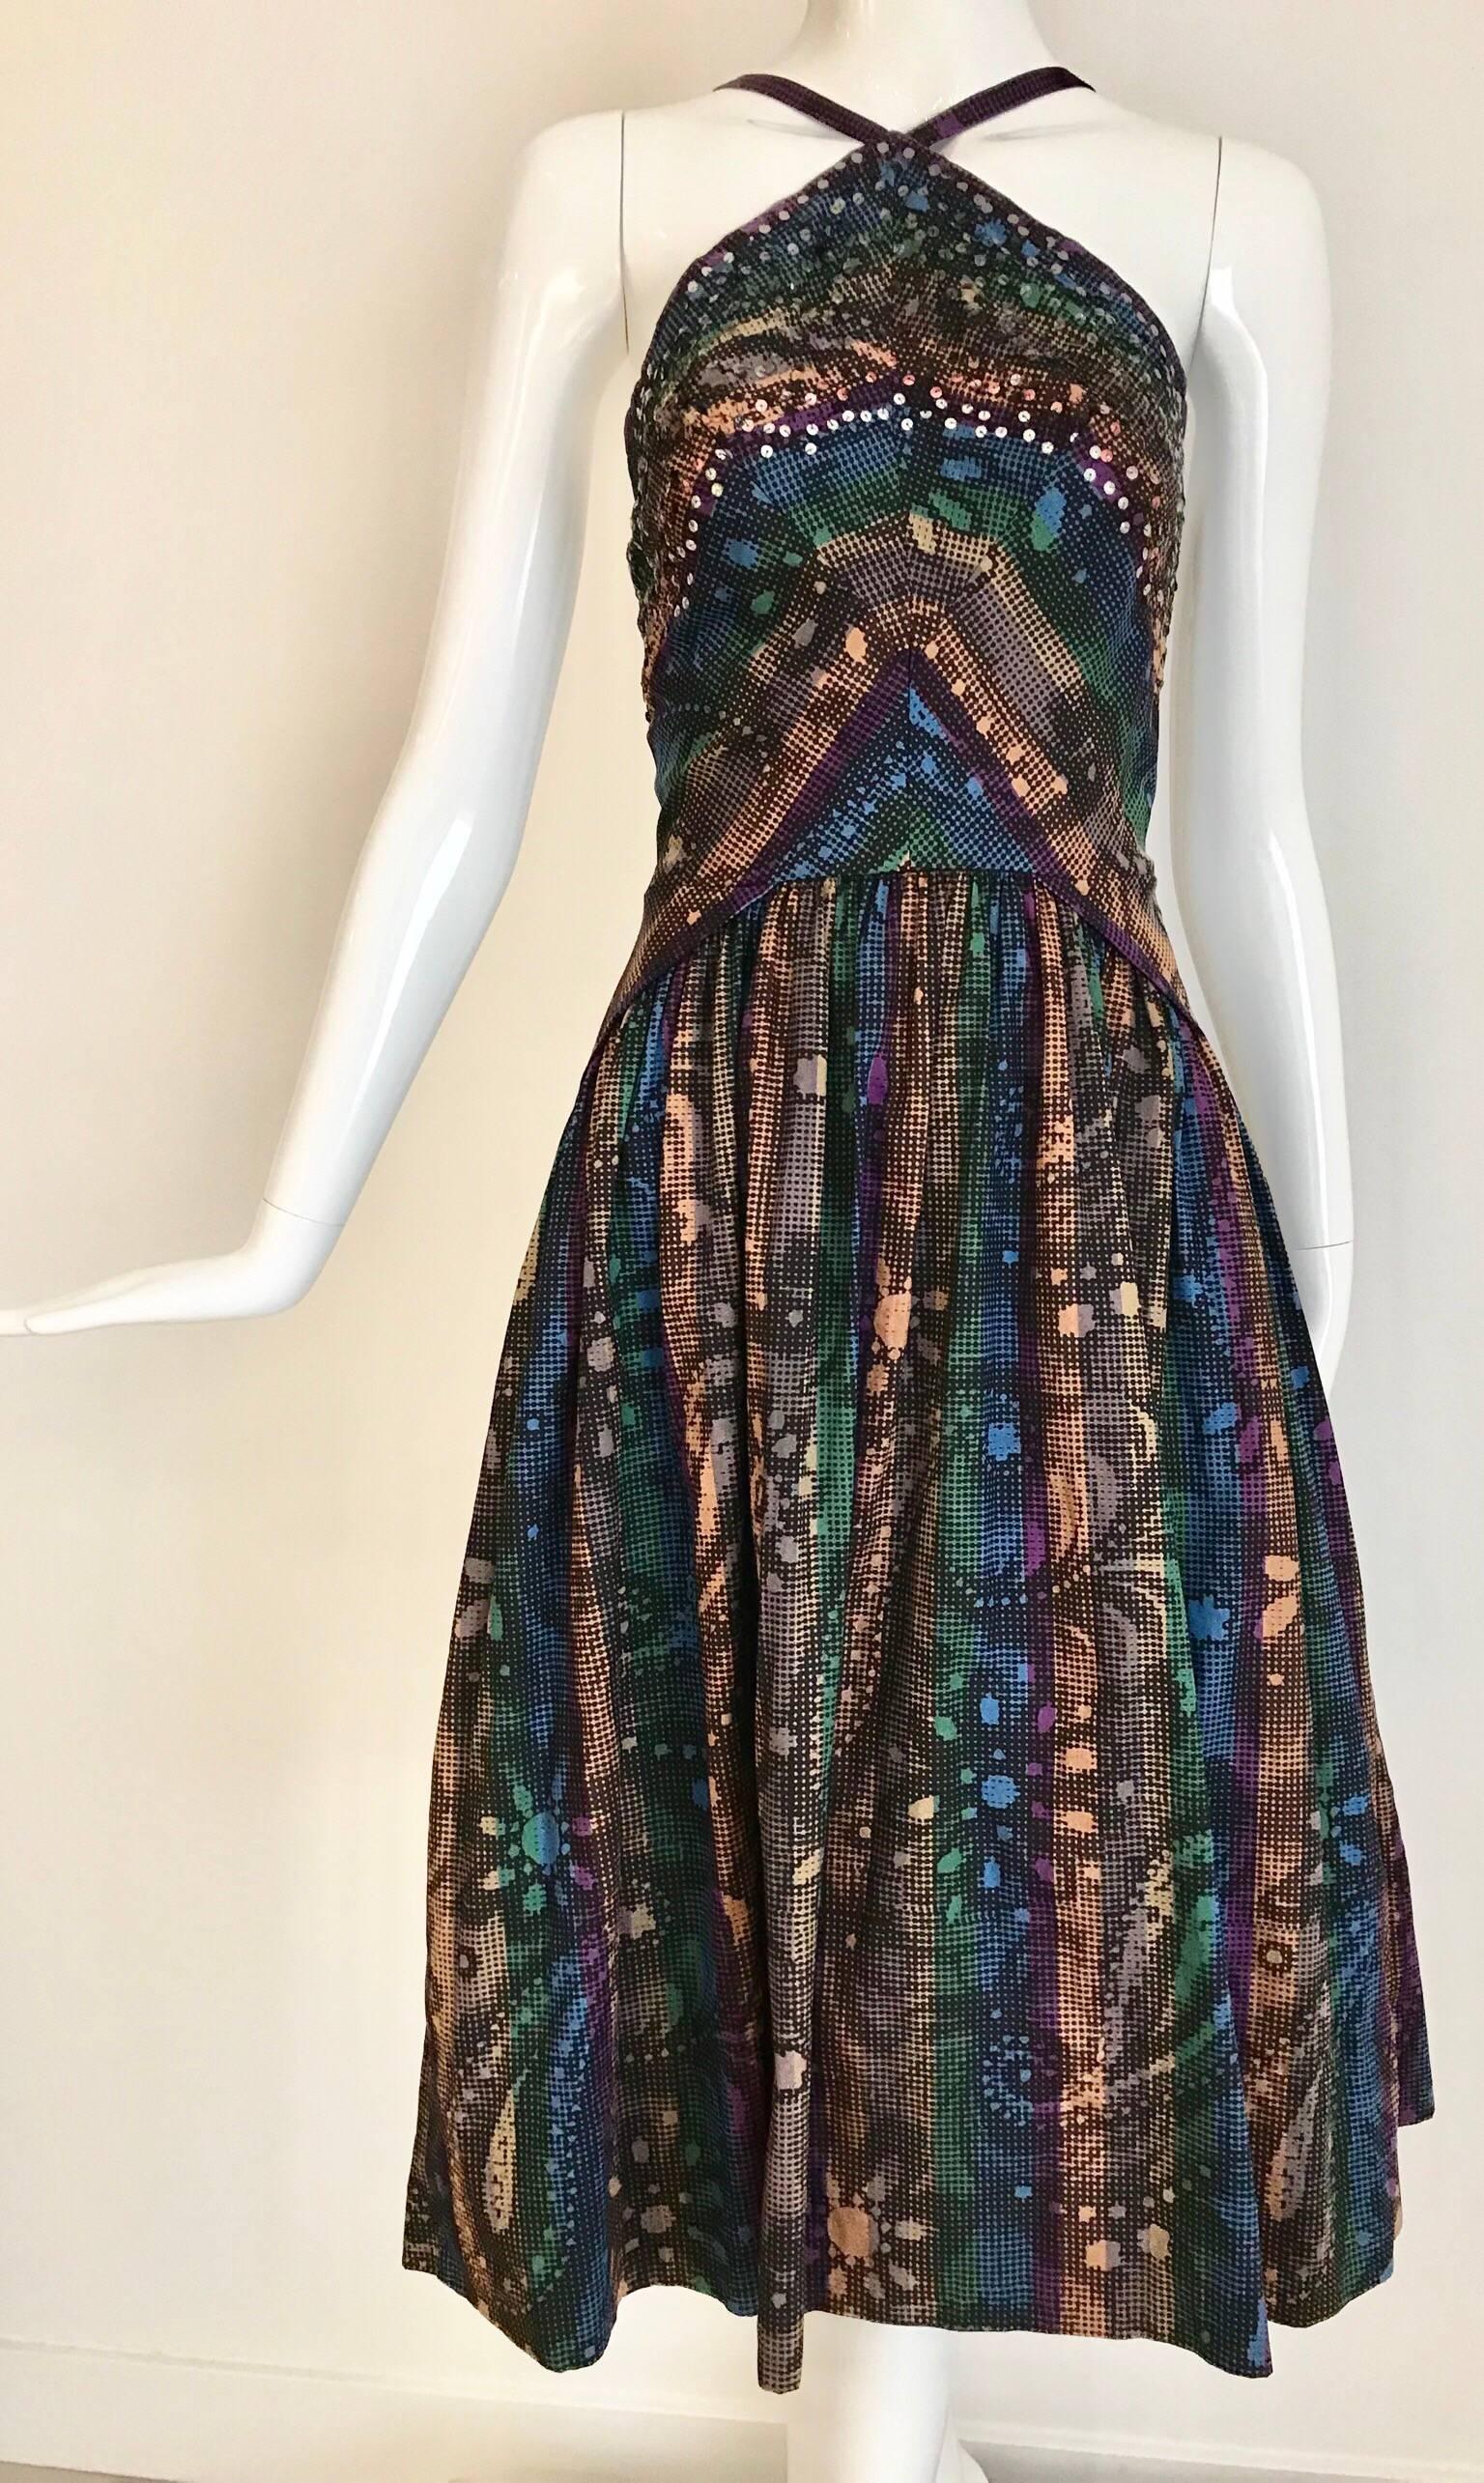 What a fun 1950s cocktail dress! Sexy Halter style with multi color print in purple, blue, green, creme, light orange and sequins.  Fitted at the waist with crinoline underneath.
Bust: 32